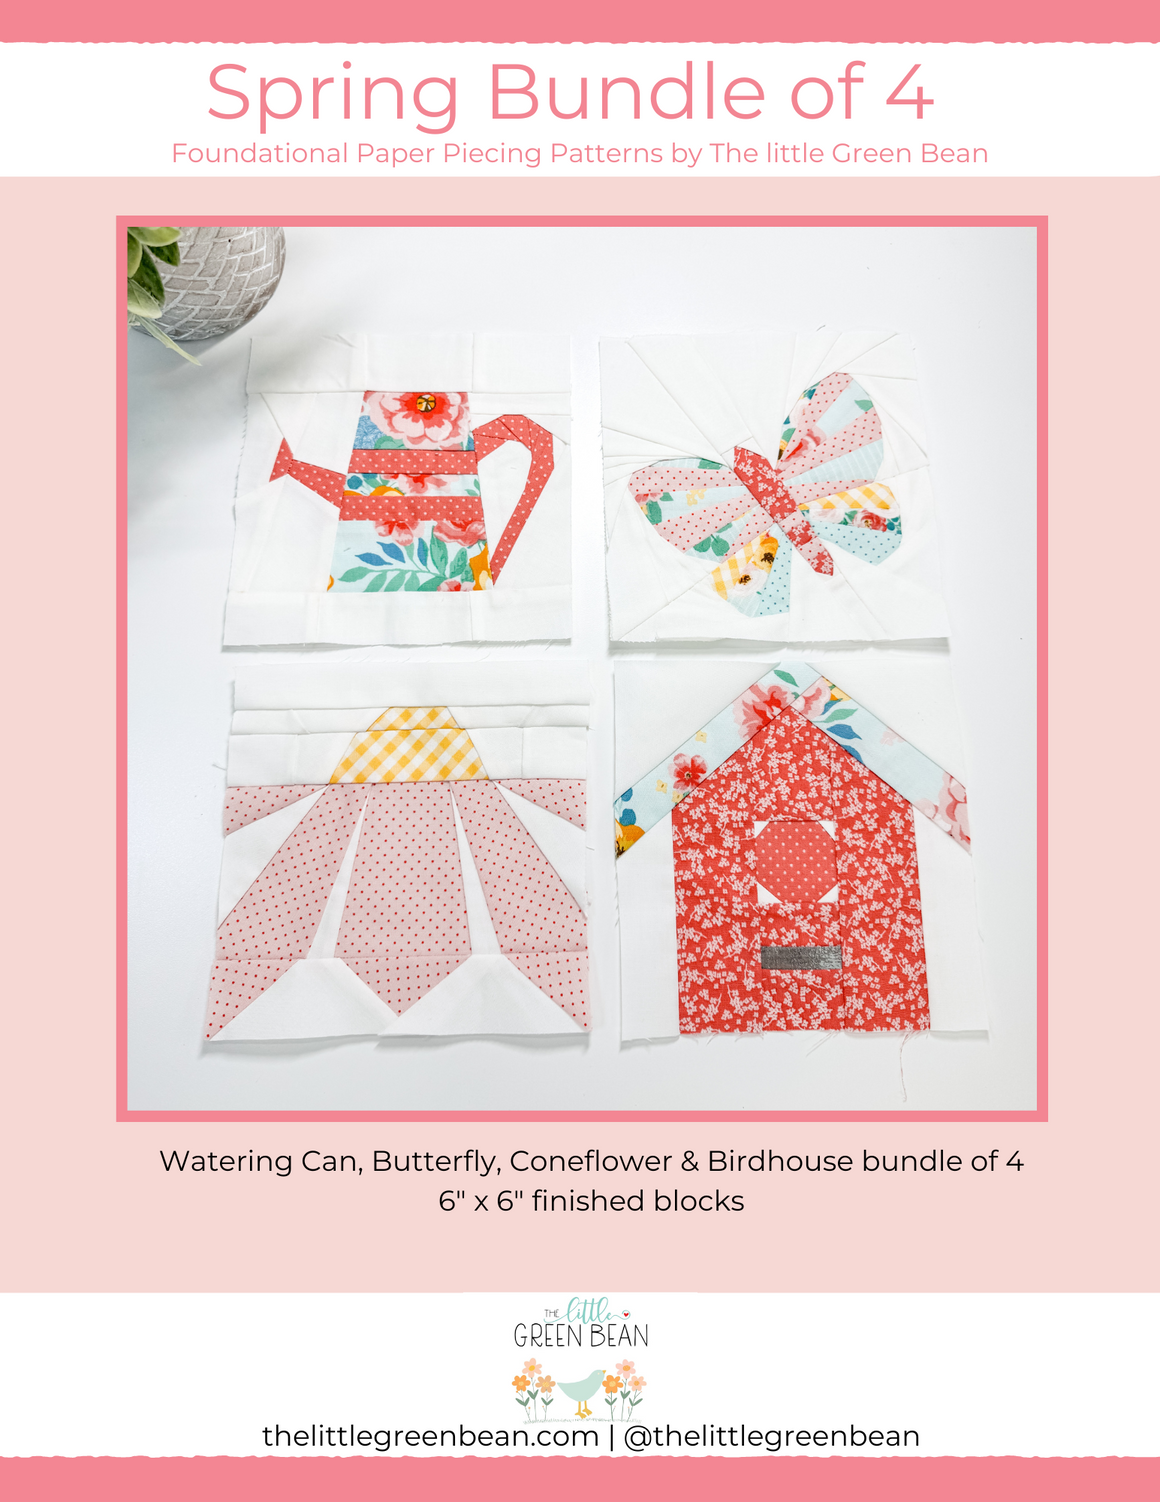 Spring Bundle of 4 FPP Templates & Instructions